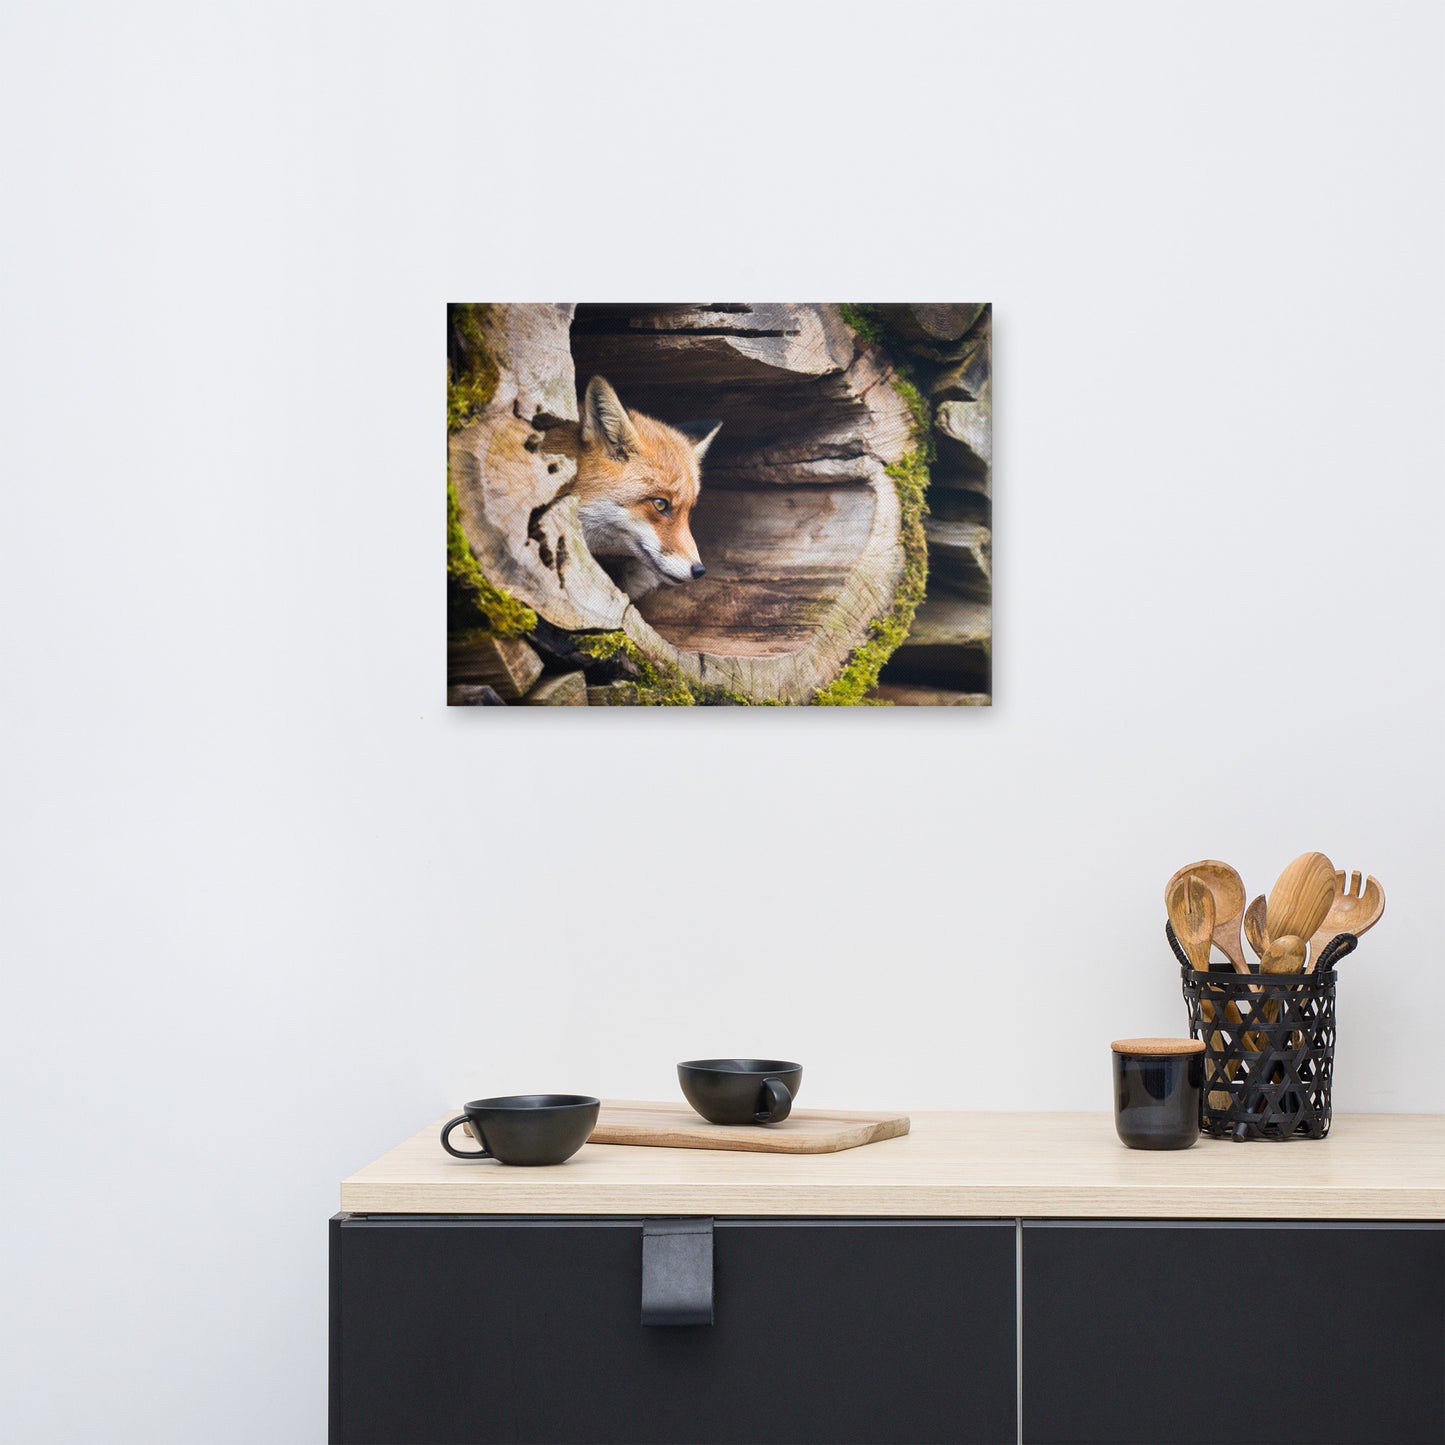 Young Red Fox Face In Mossy Stump Animal Wildlife Nature Photograph Canvas Wall Art Prints